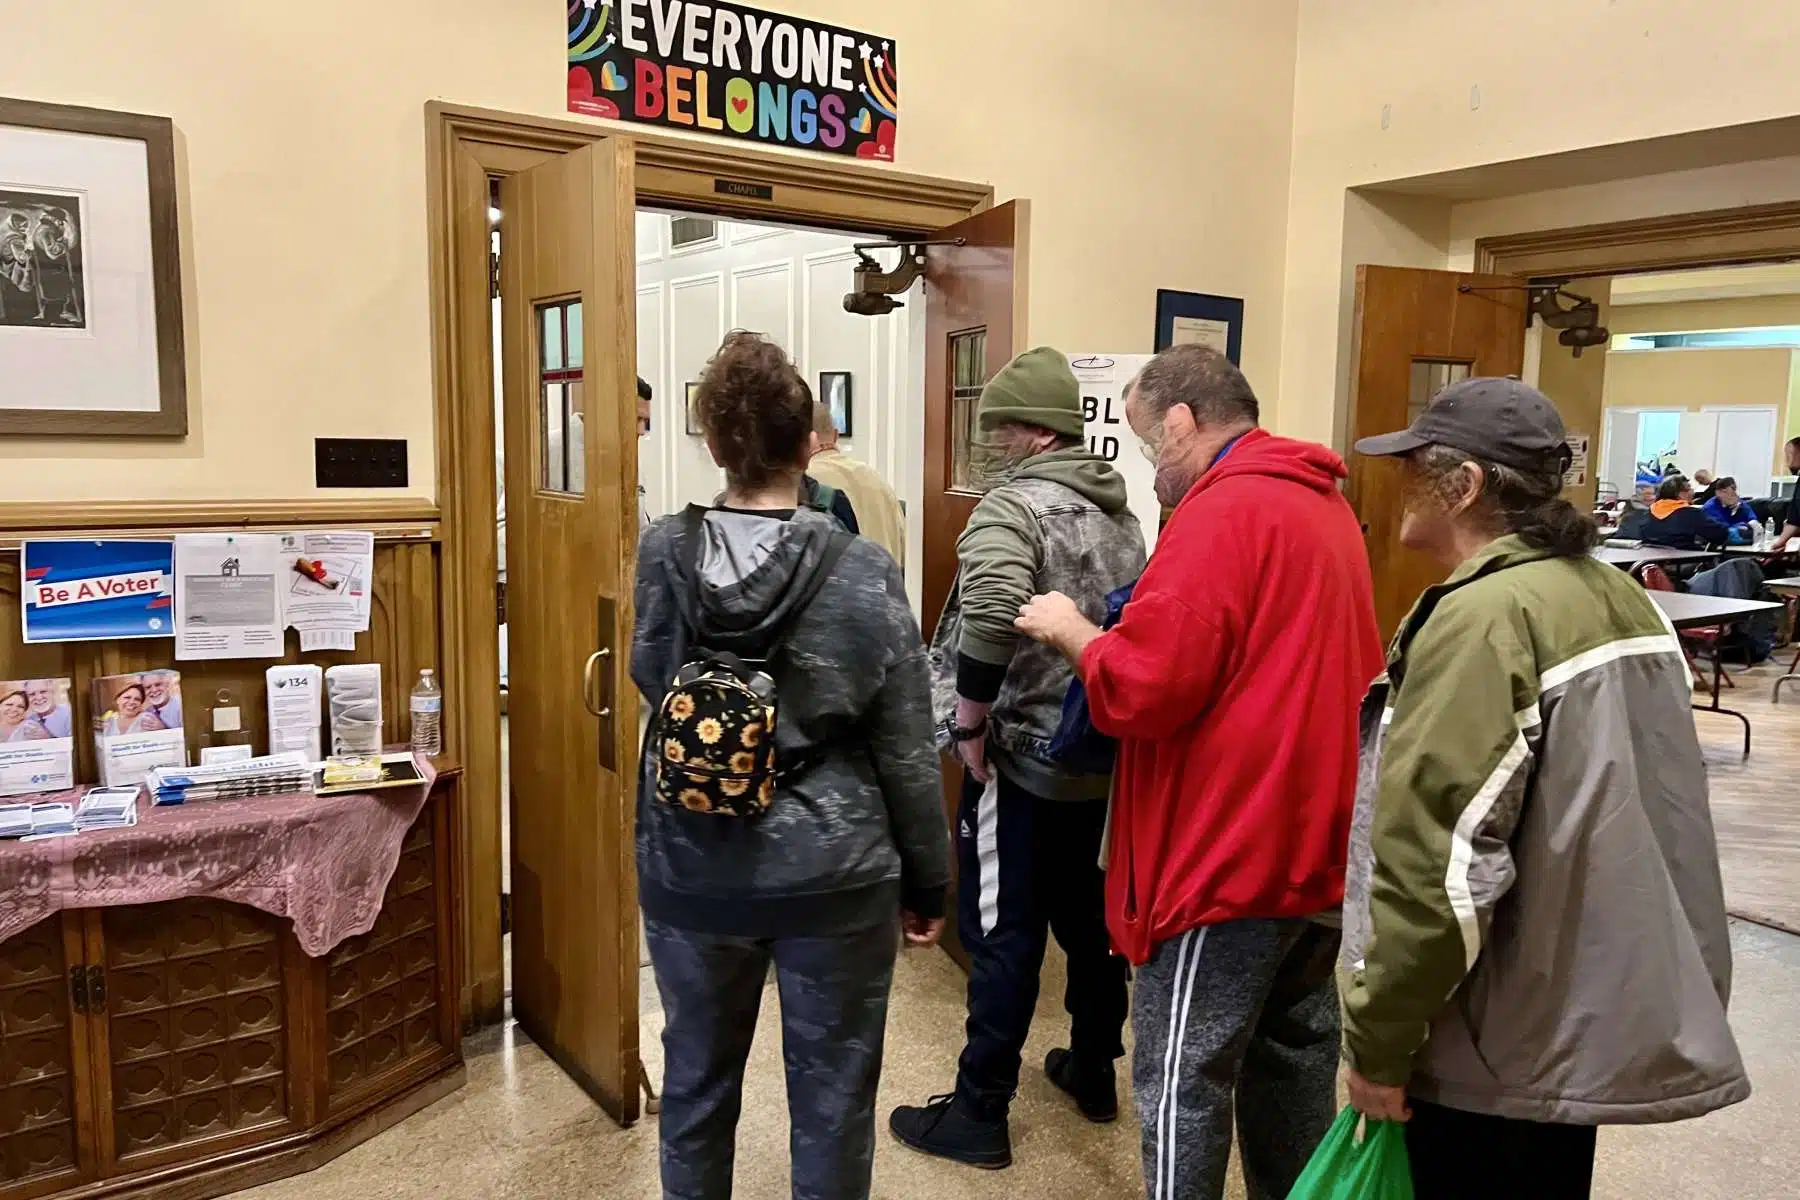 Rhode Island News: Demand for bus passes grossly outpaces supply at Mathewson Street Church